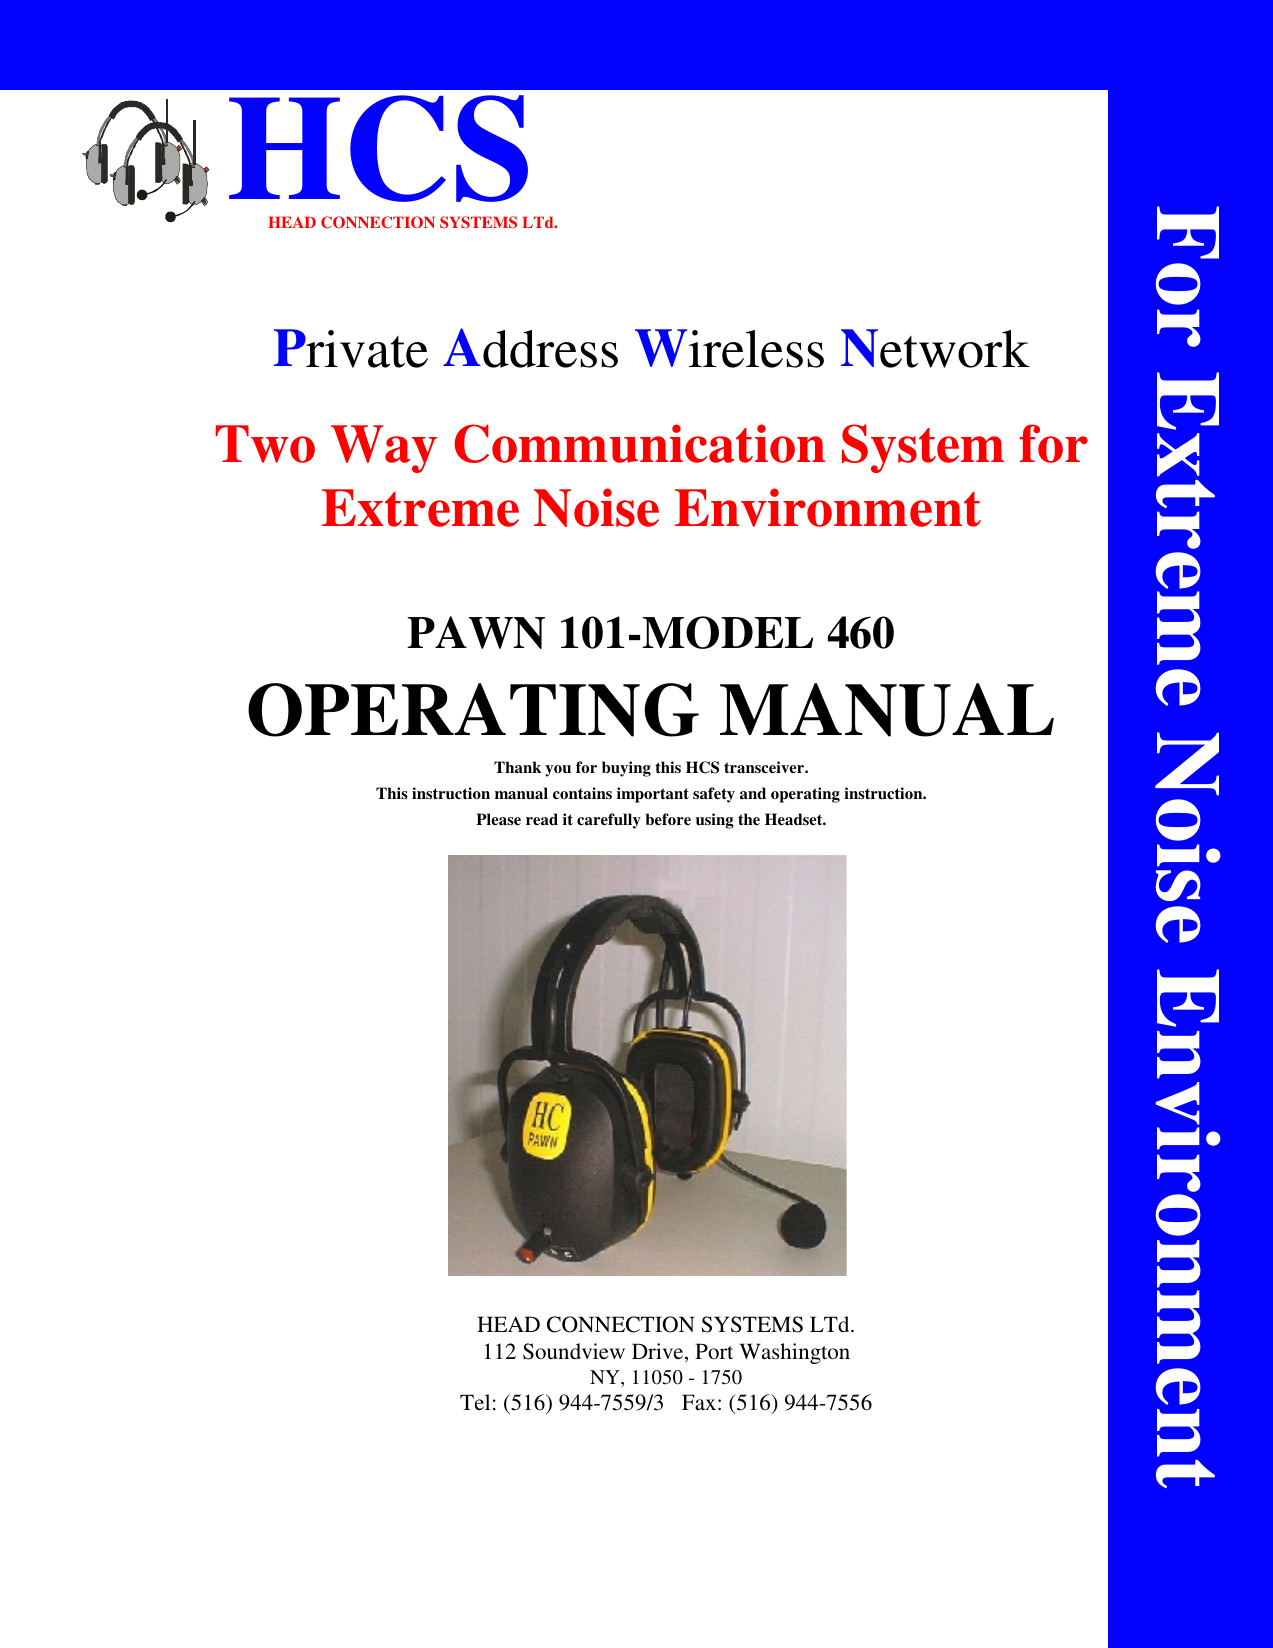                       HCSHEAD CONNECTION SYSTEMS LTd.Private Address Wireless NetworkTwo Way Communication System forExtreme Noise EnvironmentPAWN 101-MODEL 460OPERATING MANUALThank you for buying this HCS transceiver.This instruction manual contains important safety and operating instruction.Please read it carefully before using the Headset.HEAD CONNECTION SYSTEMS LTd.112 Soundview Drive, Port WashingtonNY, 11050 - 1750Tel: (516) 944-7559/3   Fax: (516) 944-7556For Extreme Noise Environment